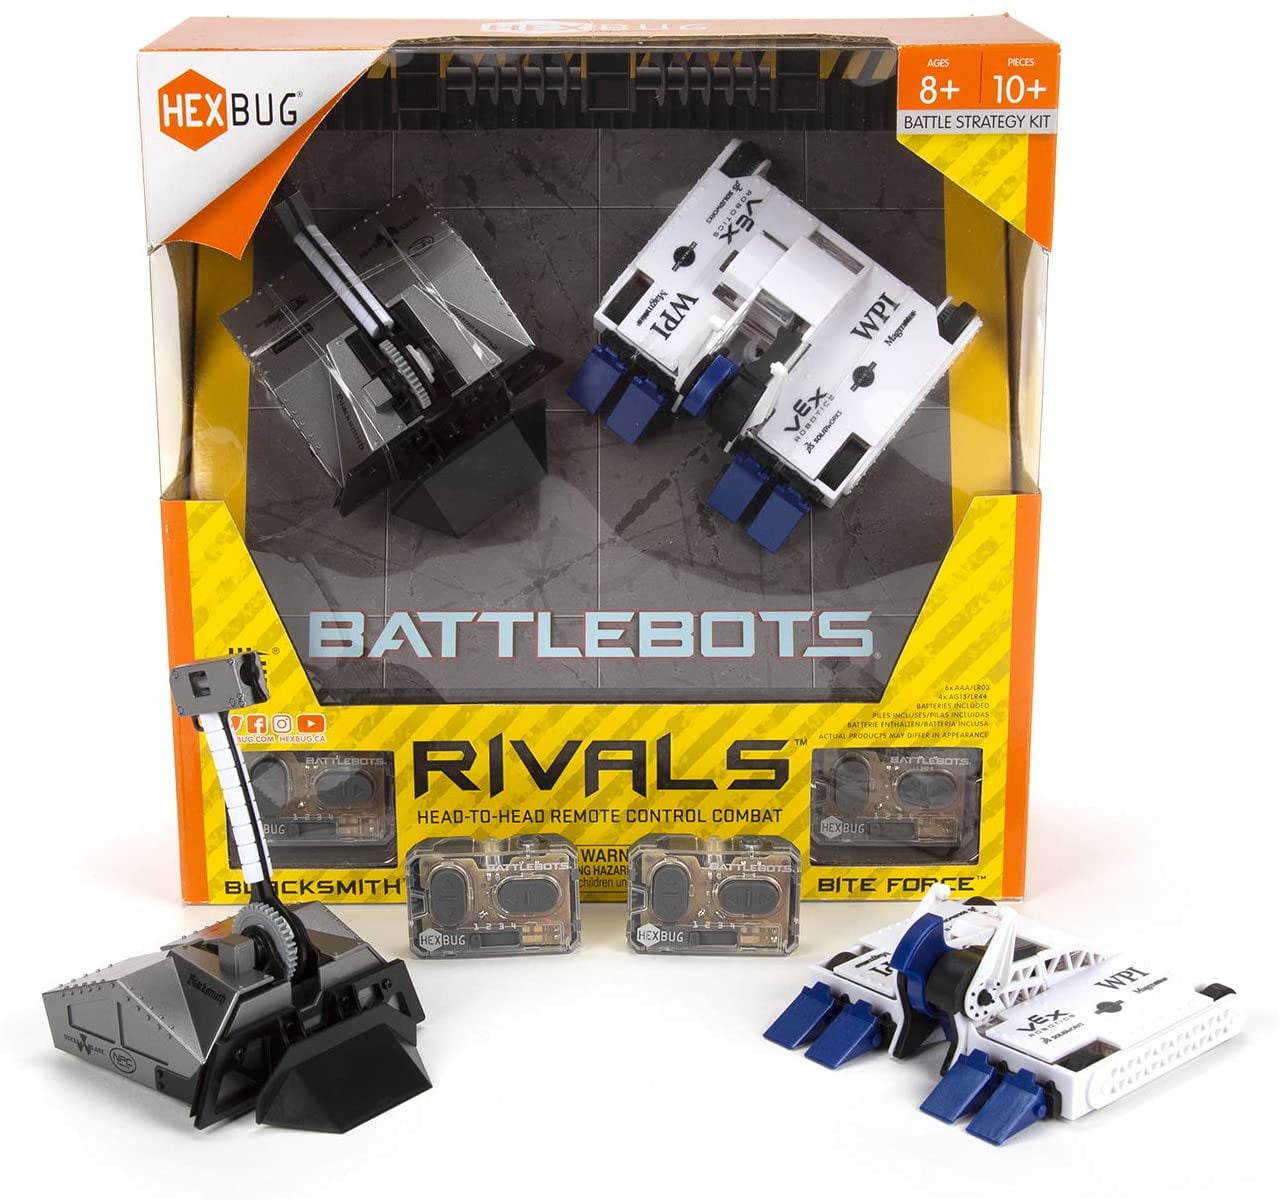 HEXBUG Battlebots Clutch and Clash Bite Force Robot Toy for sale online 